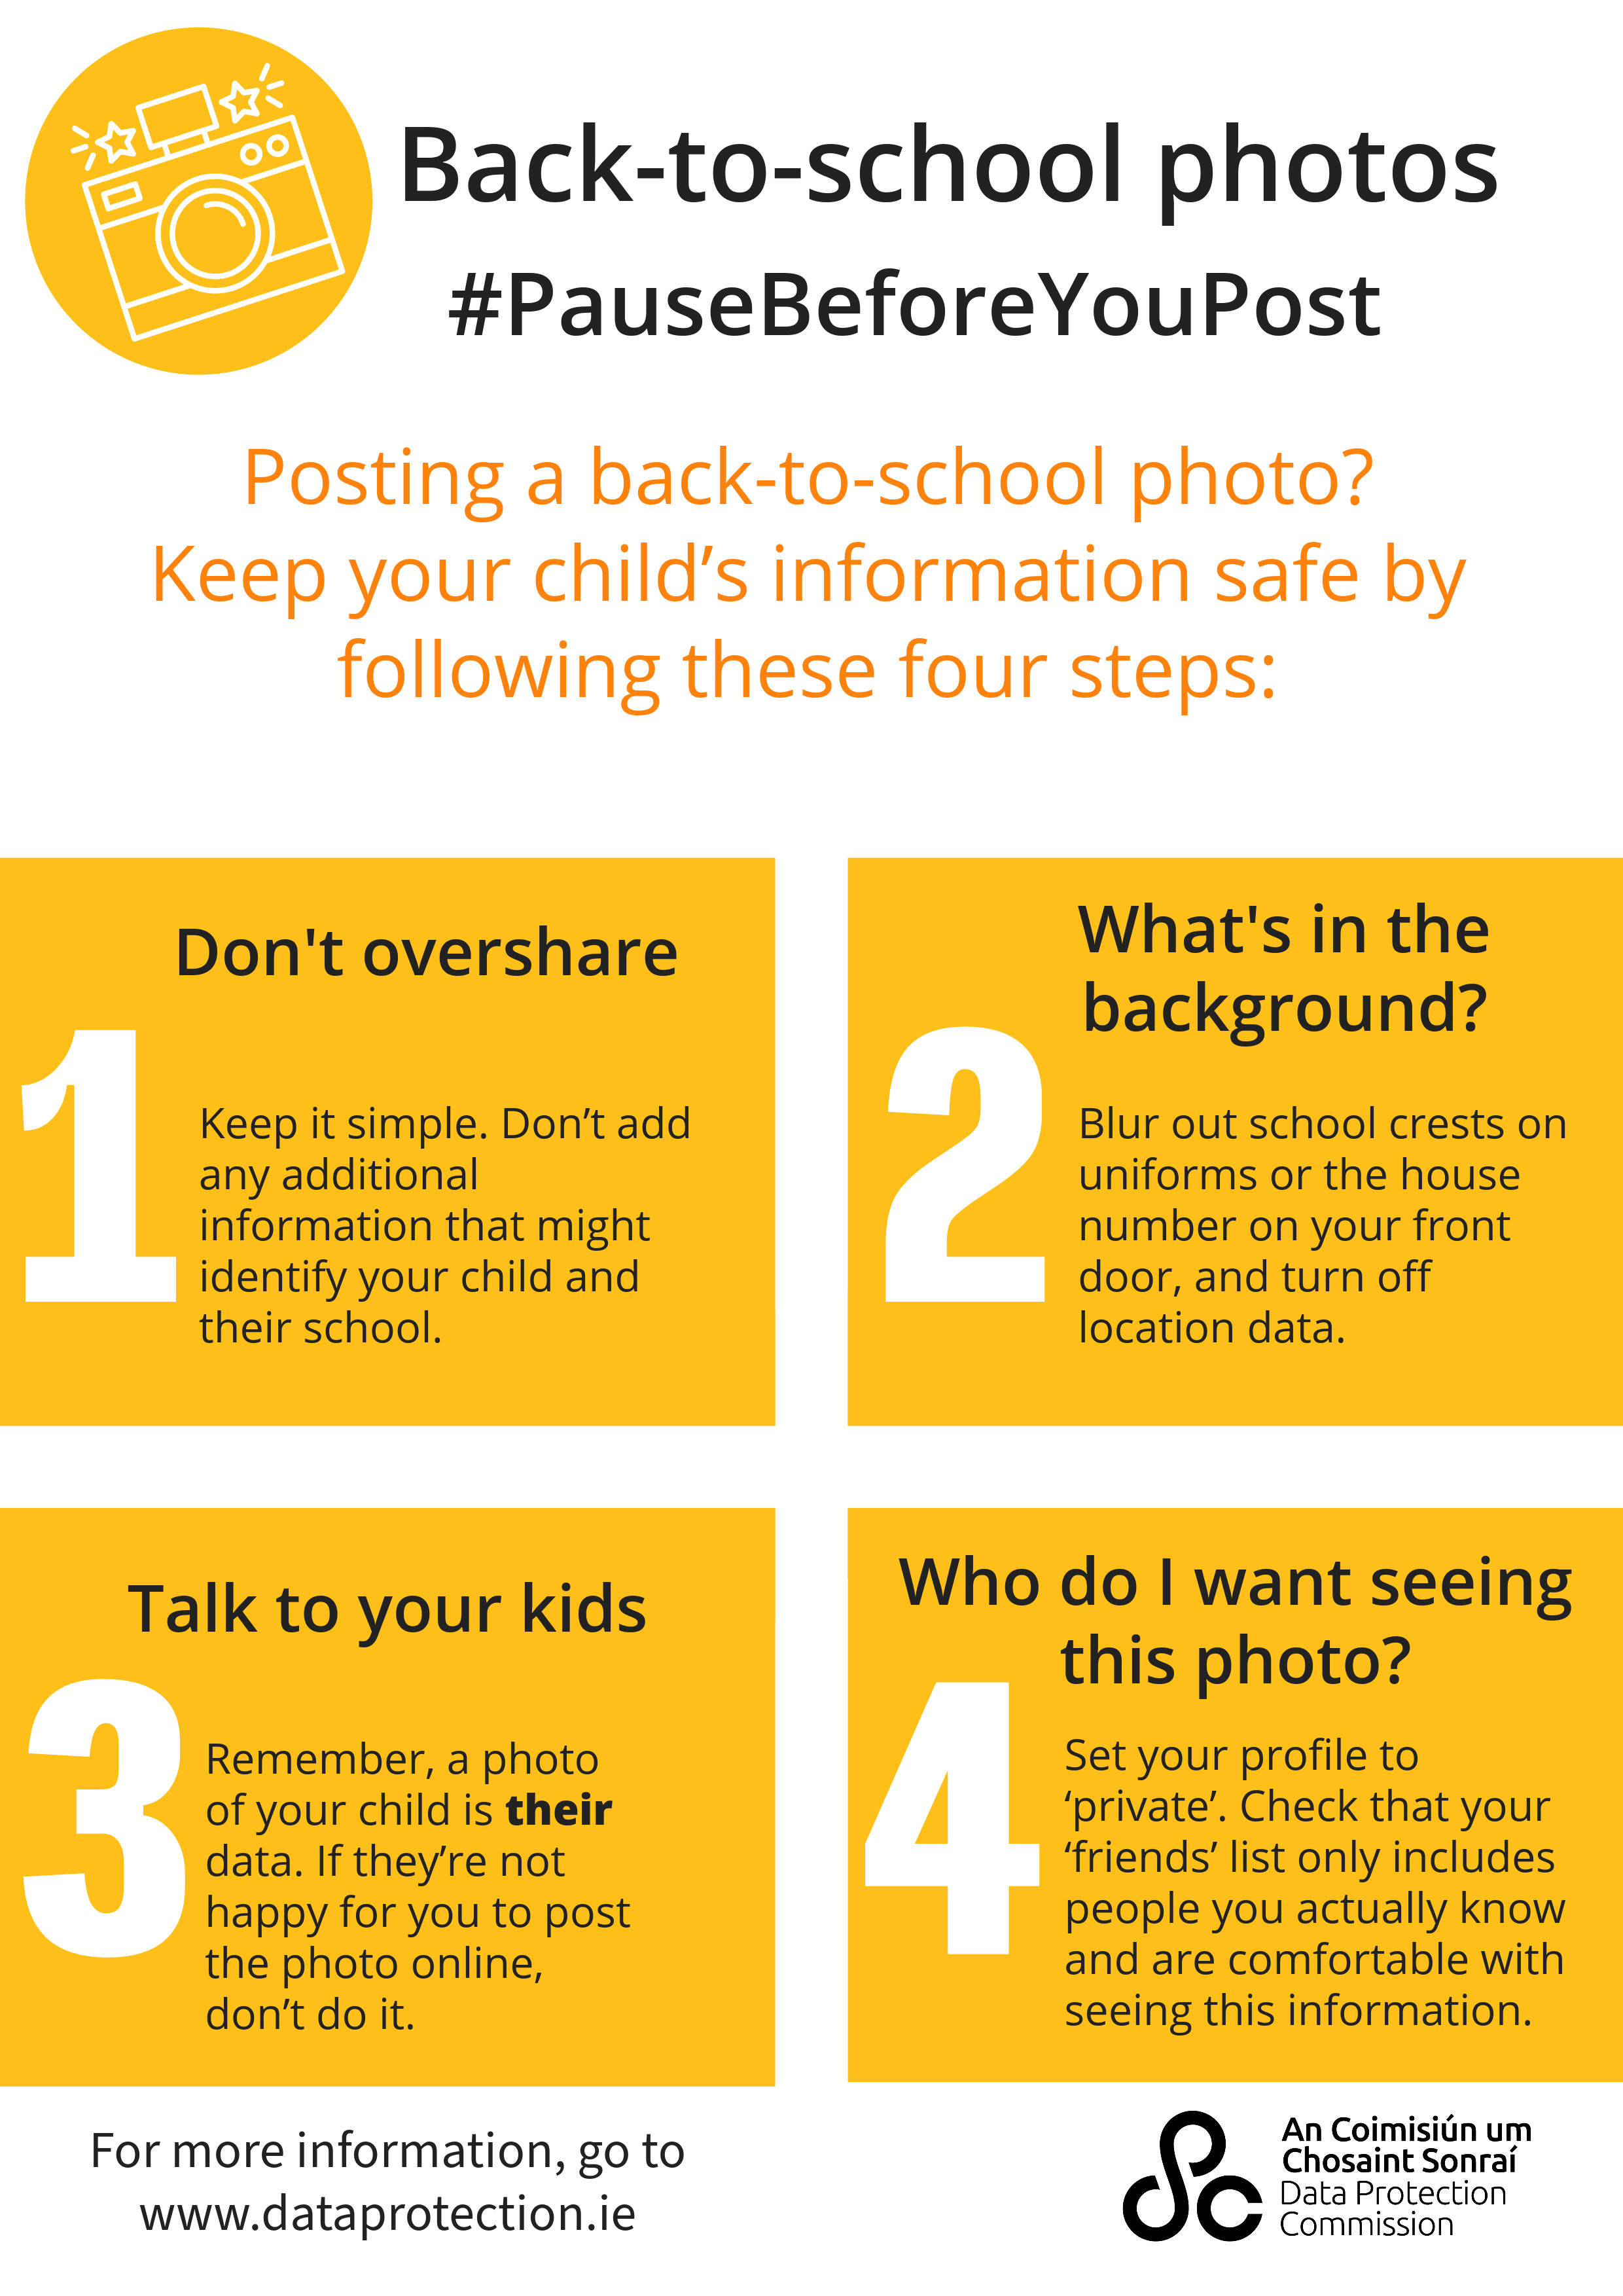 infographic with a graphic of a camera on the top left corner with the heading 'Back-to-school photos. Pause before you post'. Underneath this is the words, 'posting a back-to-school photo? Keep your child's information safe by following these four steps:' Below this are four steps. 1 - don't overshare. Keep it simple. Don't add any additional information that might identify your child and their school. Step 2, What's in the background? Blur out school crests on uniforms or the house number on your front door, and turn off location data? Step 3, Talk to your kids. Remember, a photo of your child is their data. If they're not happy for you to post the photo online, don't do it. Step 4, who do I want seeing this photo? Set your profile to 'private'. Check that your 'friends' list only includes people you actually know and are comfortable with seeing this information. At the bottom, it says 'for more information, go to www.dataprotection.ie and the DPC logo.